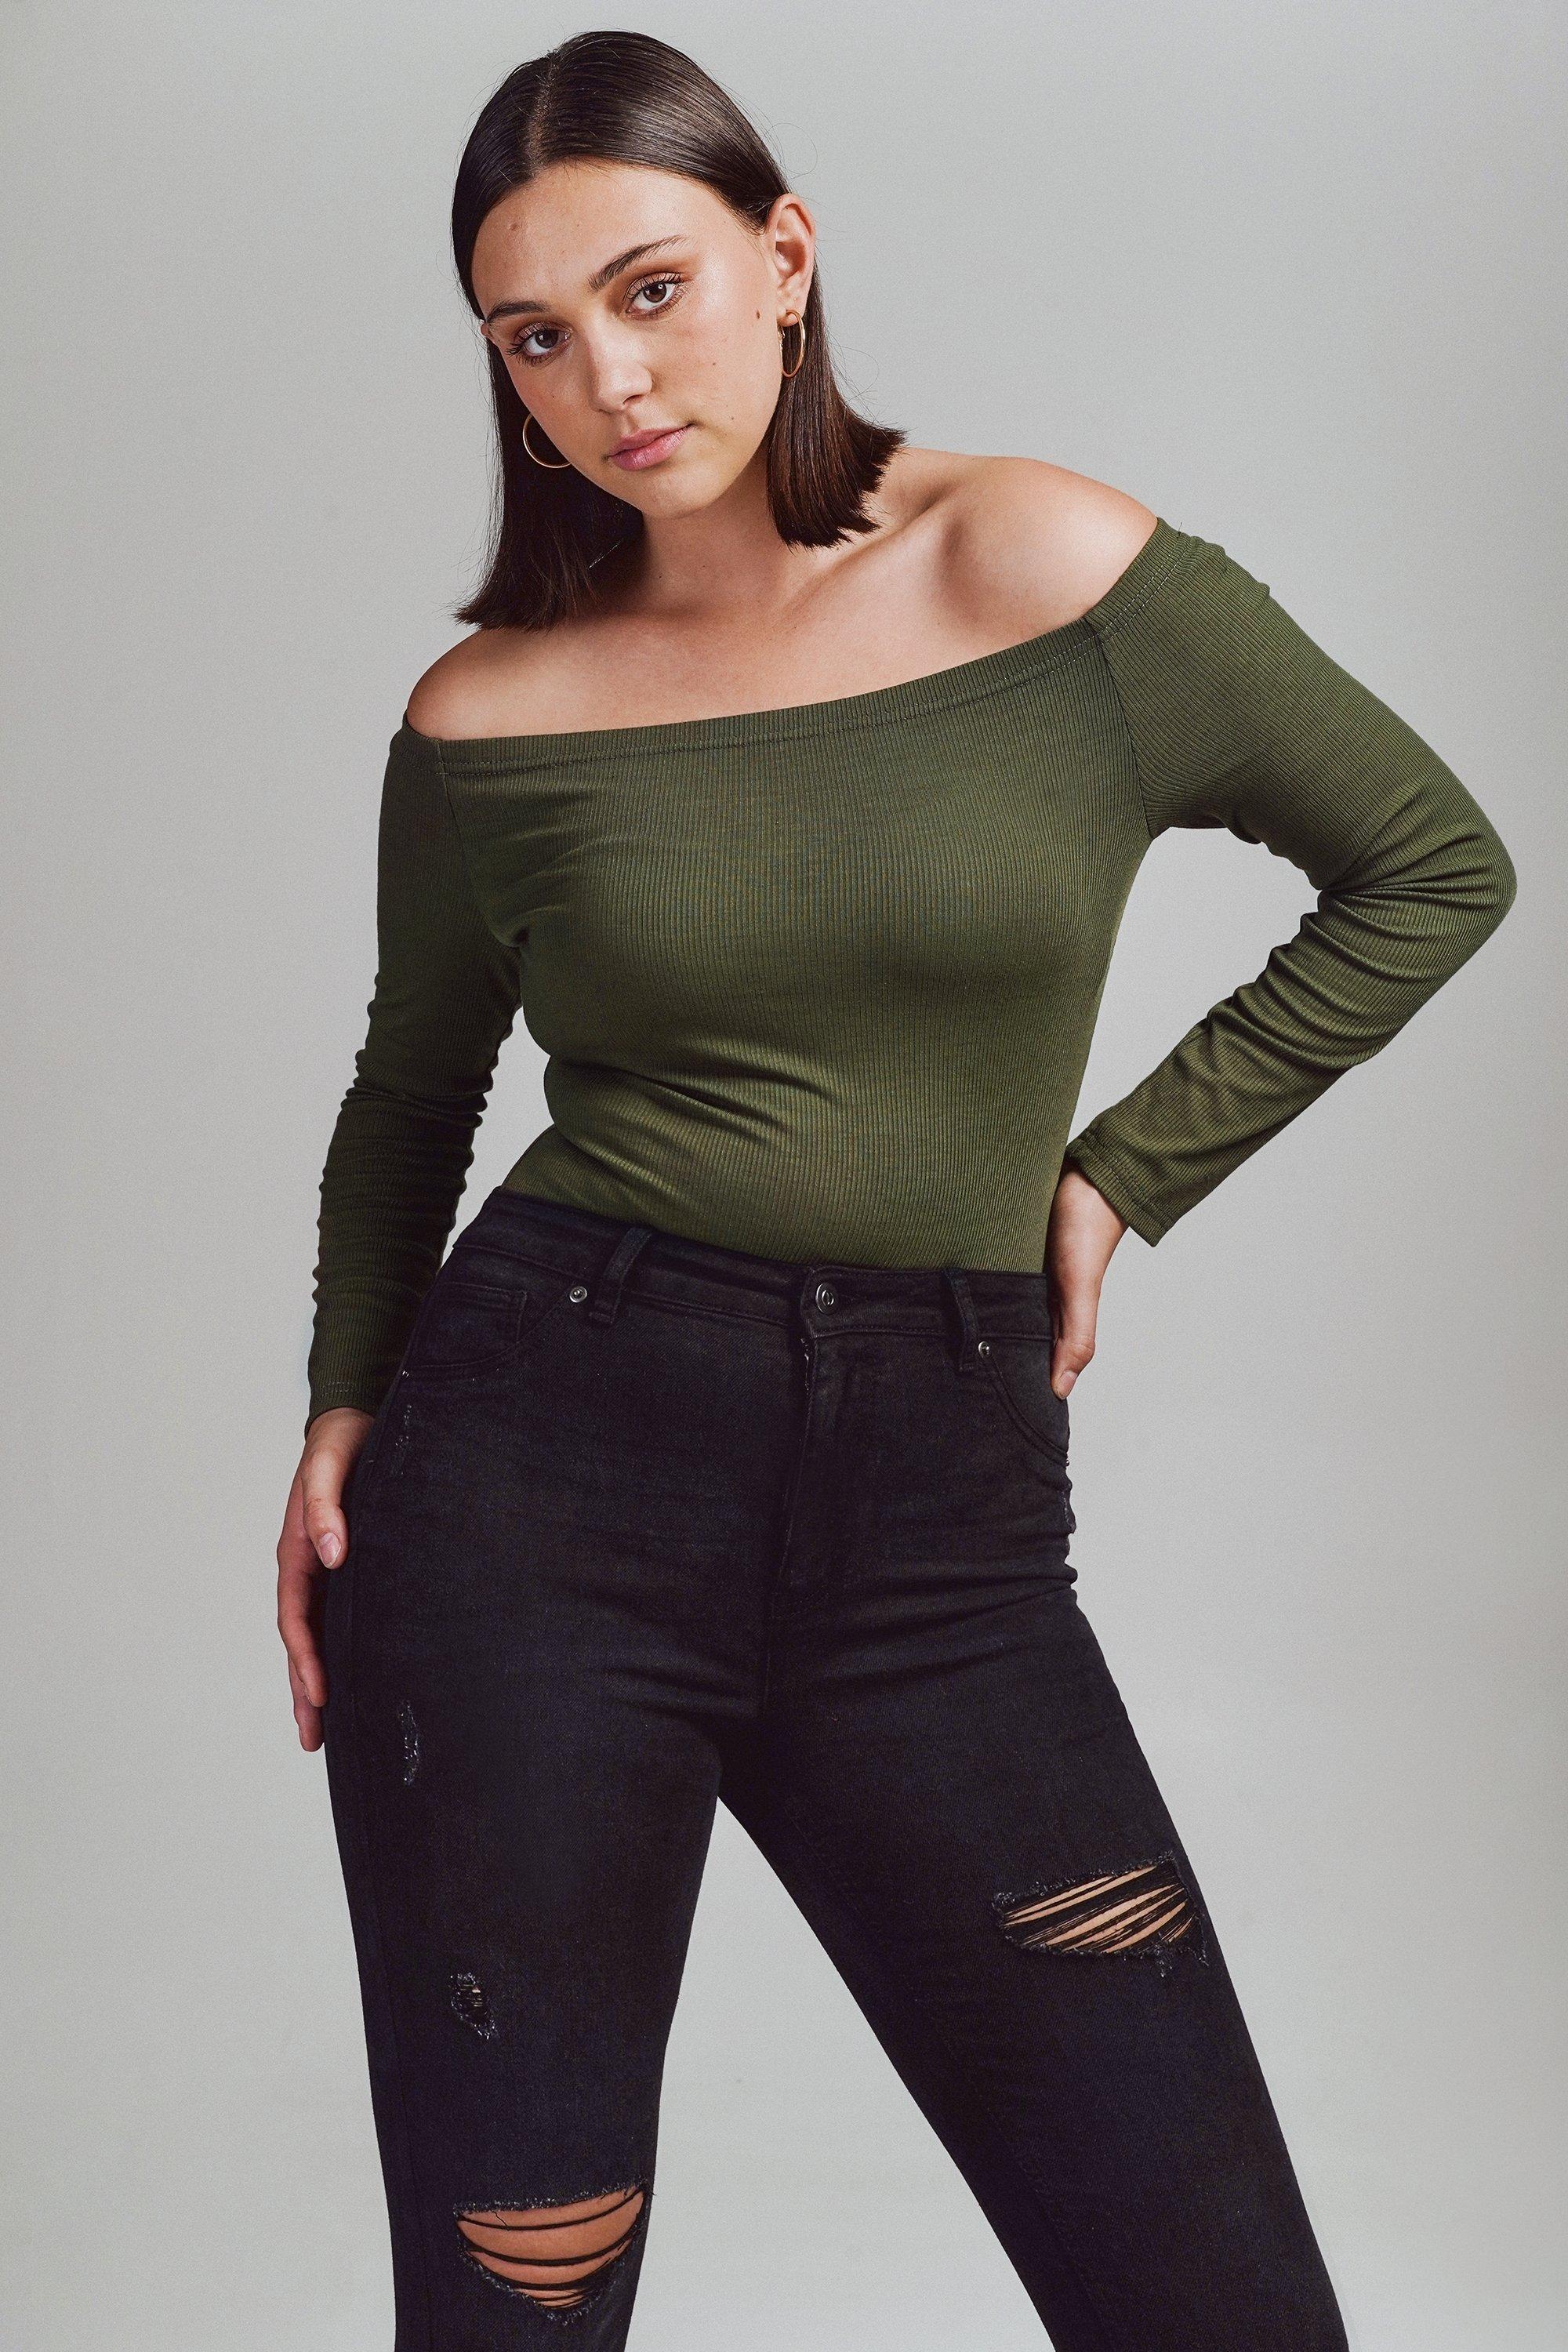 Mr Price - This one shoulder bodysuit is giving us major Friday night vibes  RN!! Get yours in-store or online now:  Bodysuit  R99.99